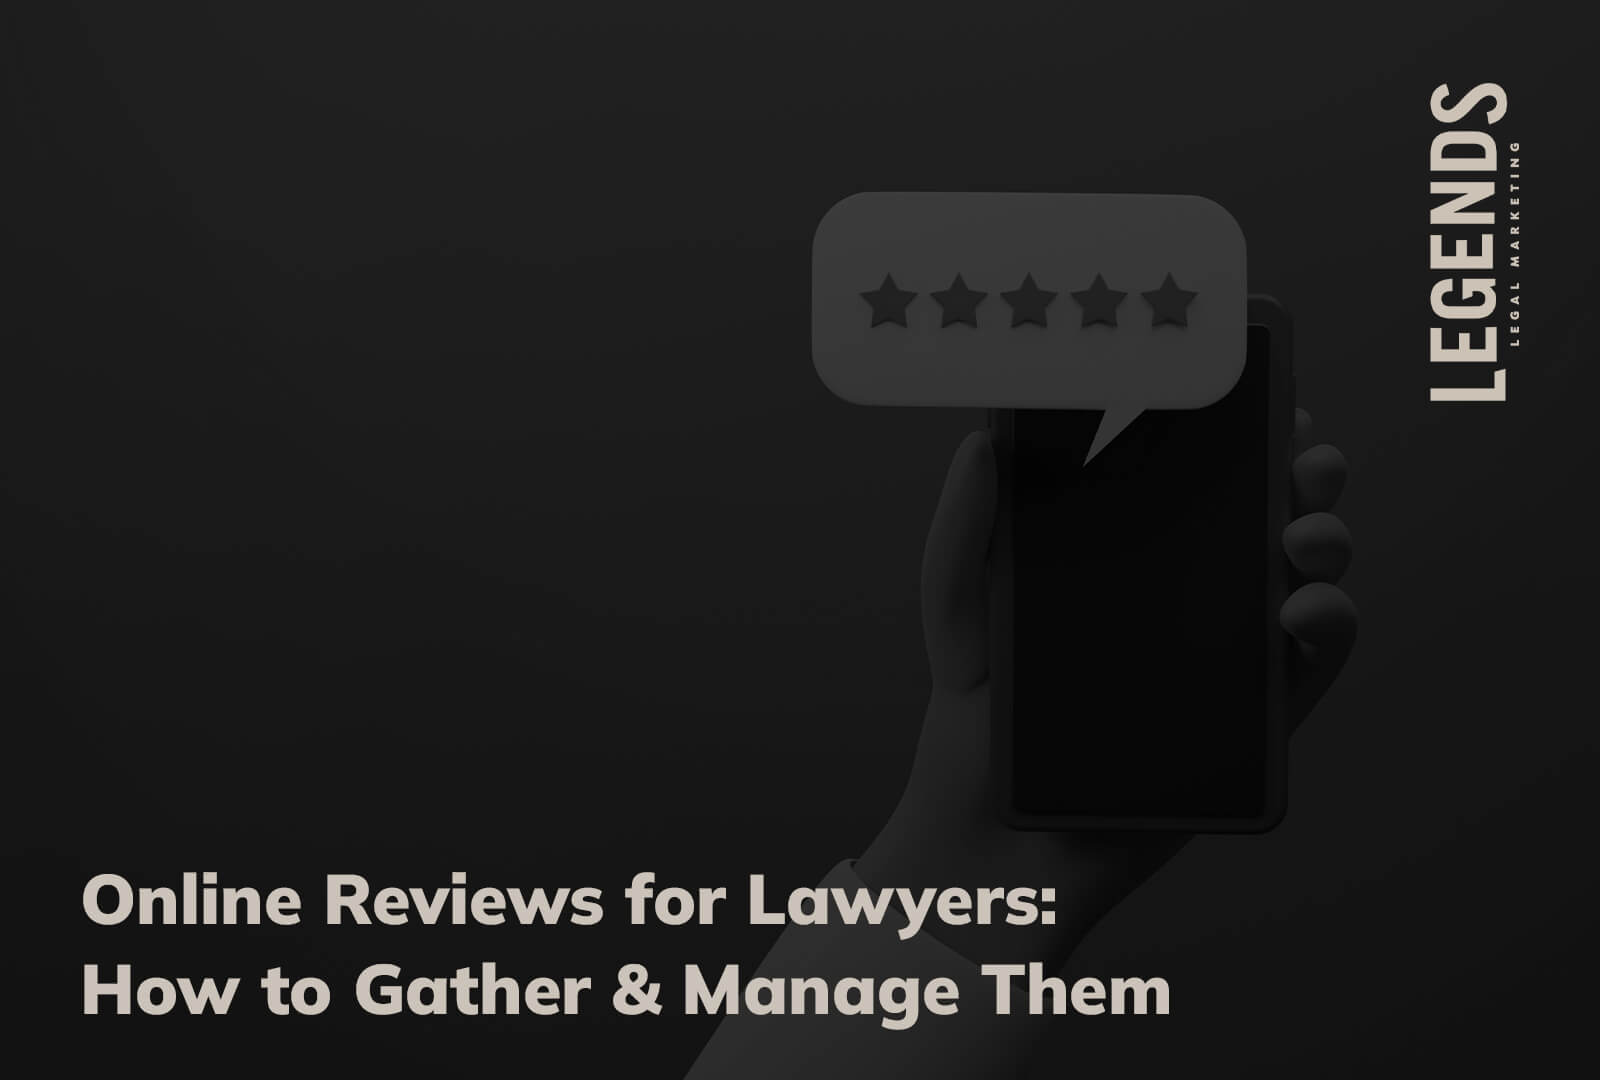 Online Reviews for Lawyers: How to Gather & Manage Them